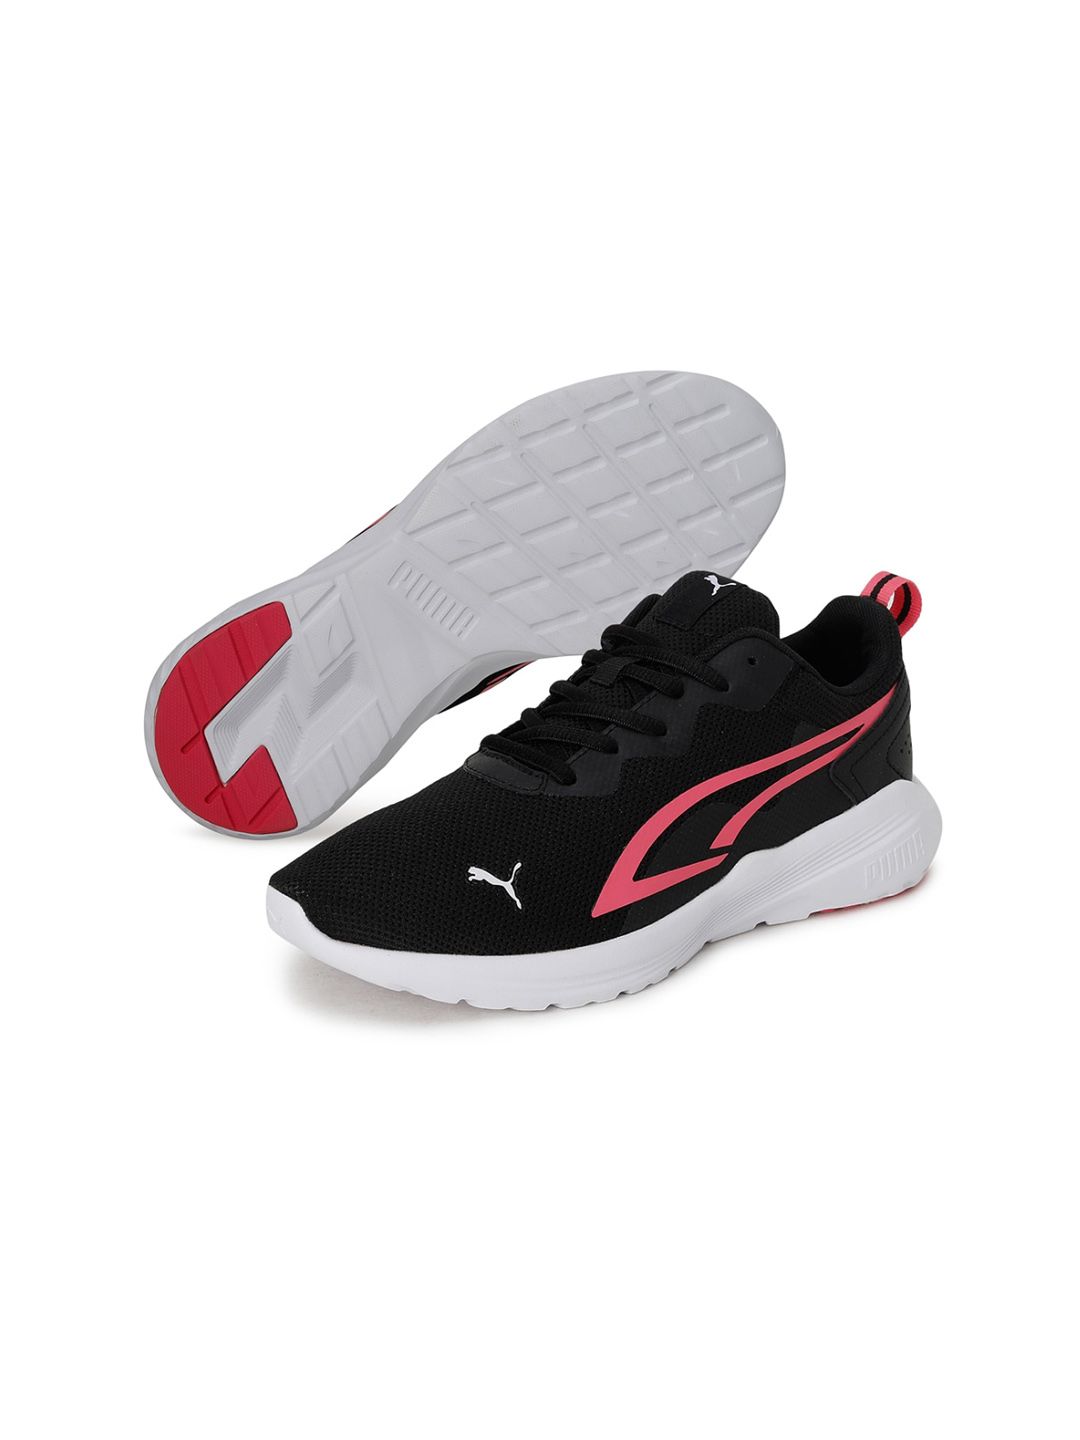 Puma Unisex Black All-Day Active Woven Design Sneakers Price in India